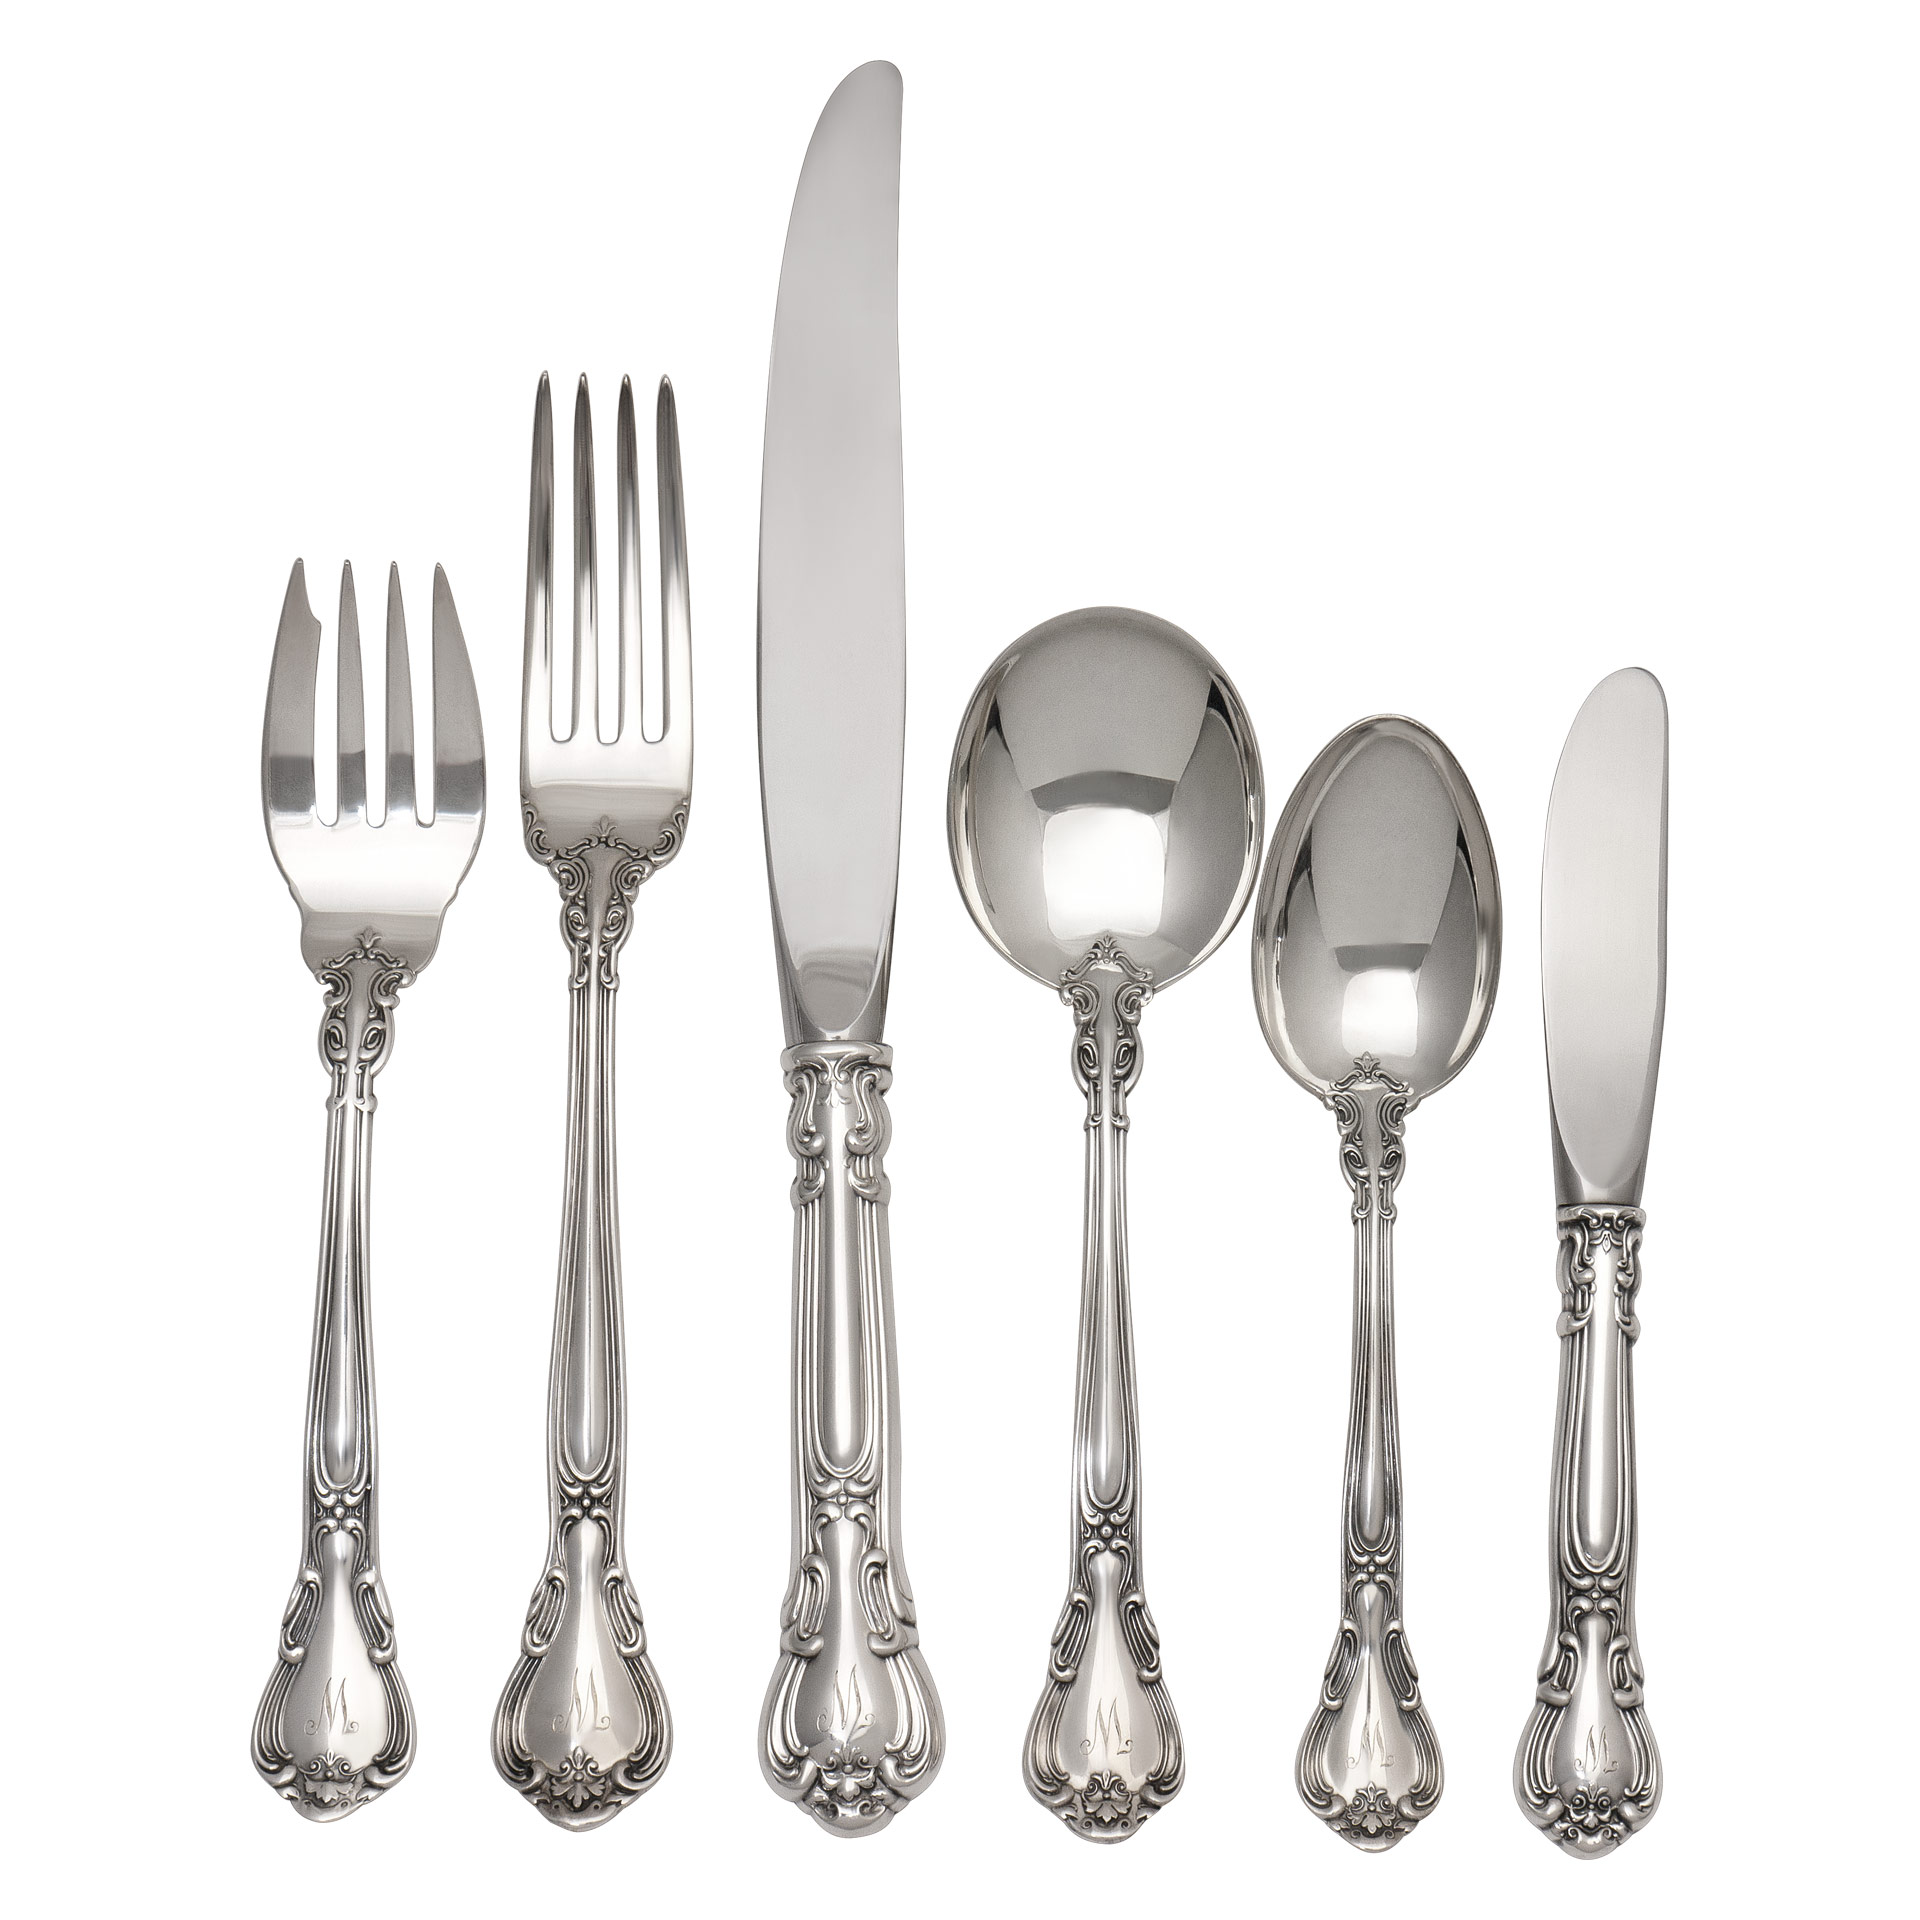  "Chantilly" Sterling Silver Flatware Set. Patented in 1895 by Gorham- 4 x 12 (incomplete) + 7 serving pieces- Over 2700 grams sterling silver. image 1